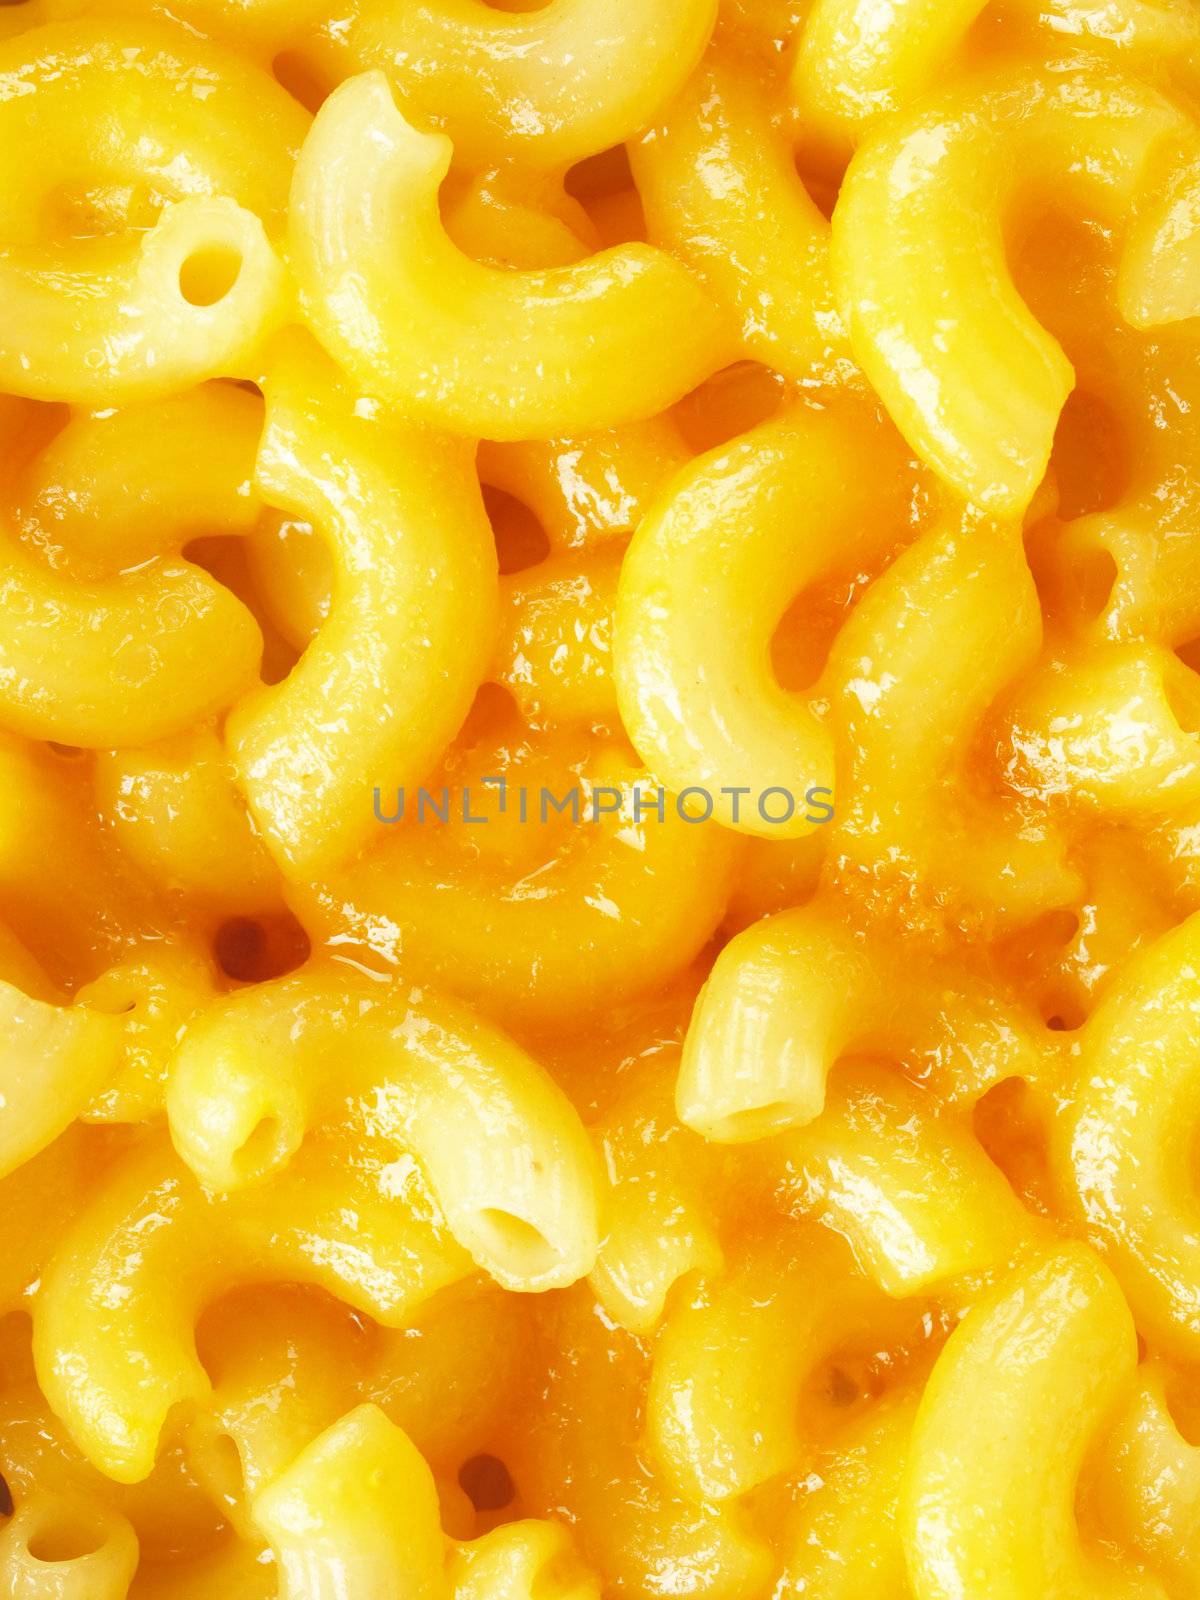 macaroni and cheese by zkruger